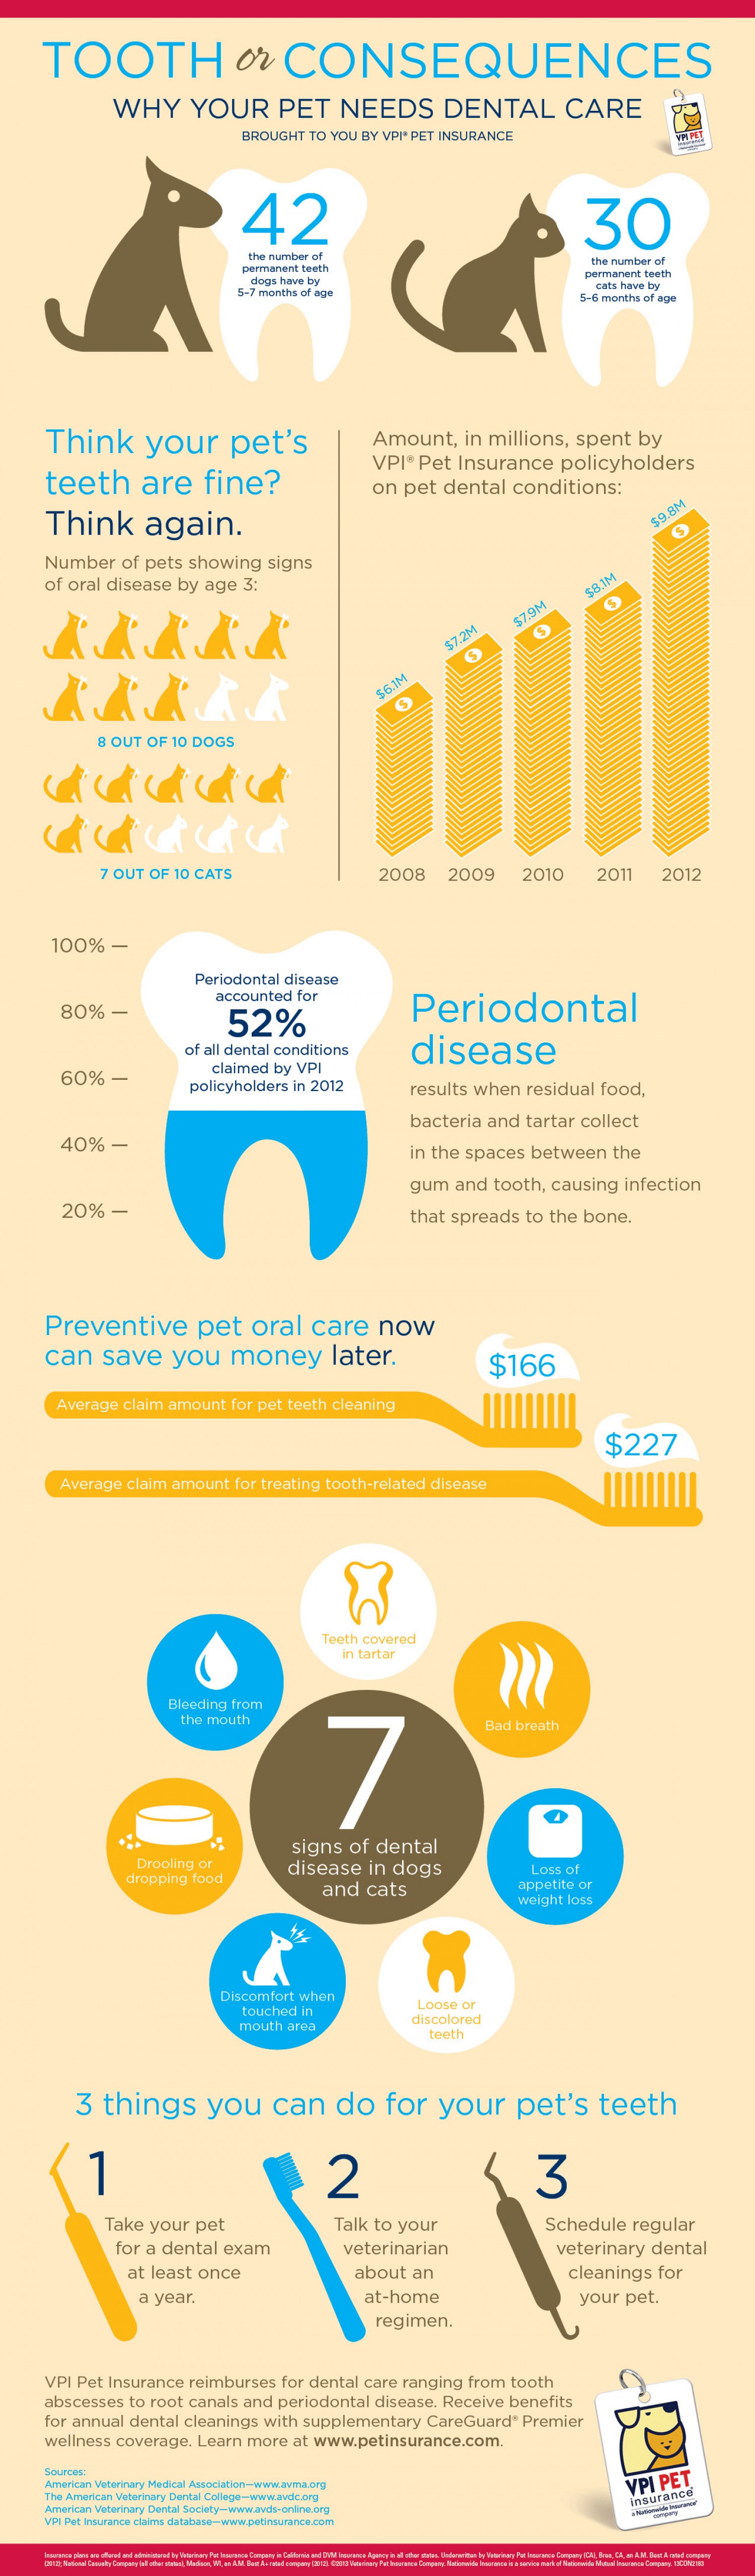 What Do You Need To Know About Dental Care? 2